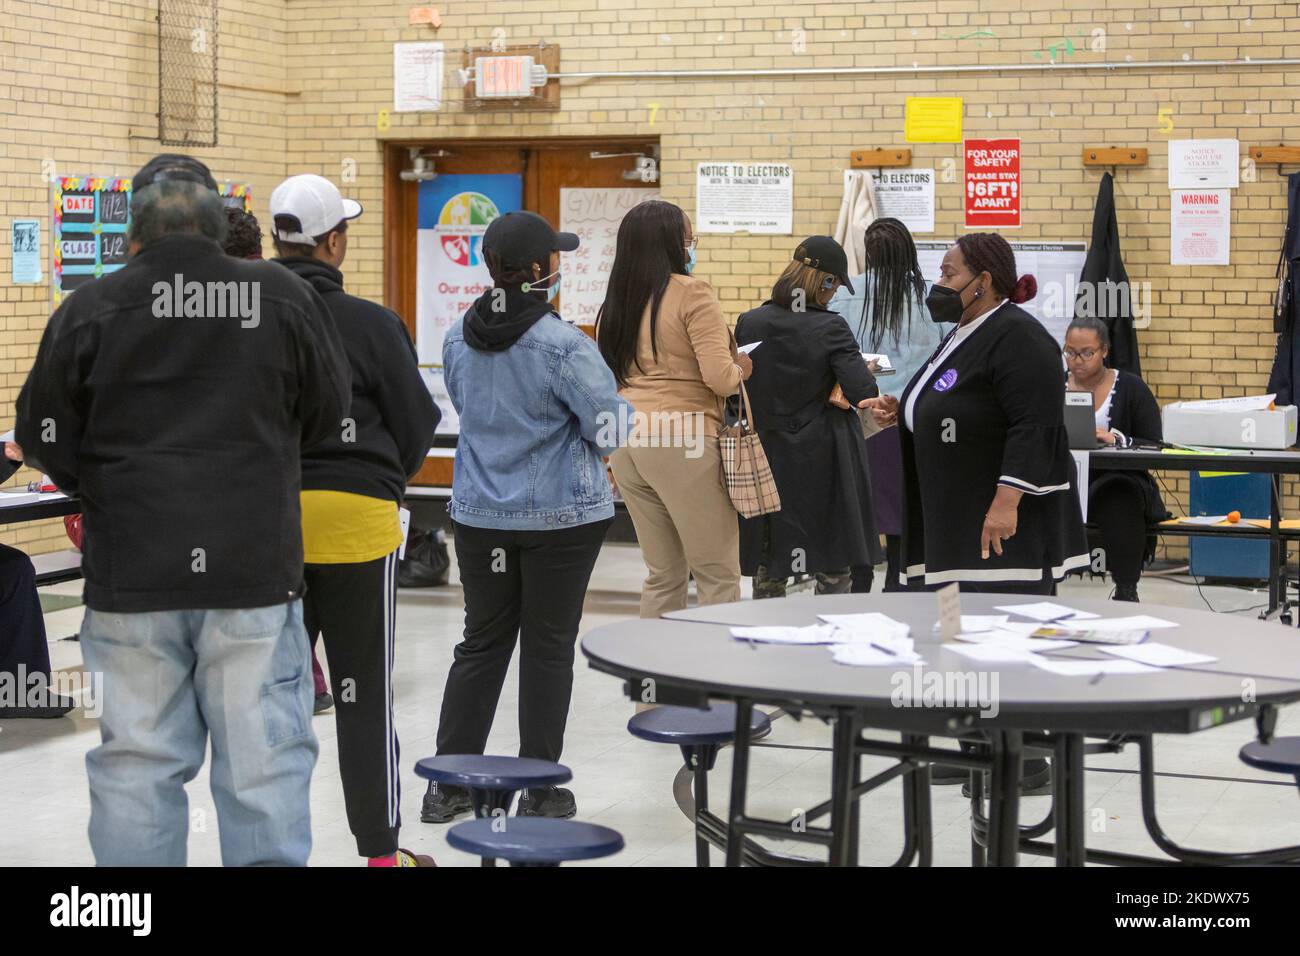 Detroit, Michigan, USA. 8th Nov, 2022. People wait in line to cast ballots in the 2022 midterm election at the J.E. Clark Preparatory Academy, a Detroit public school. Credit: Jim West/Alamy Live News Stock Photo